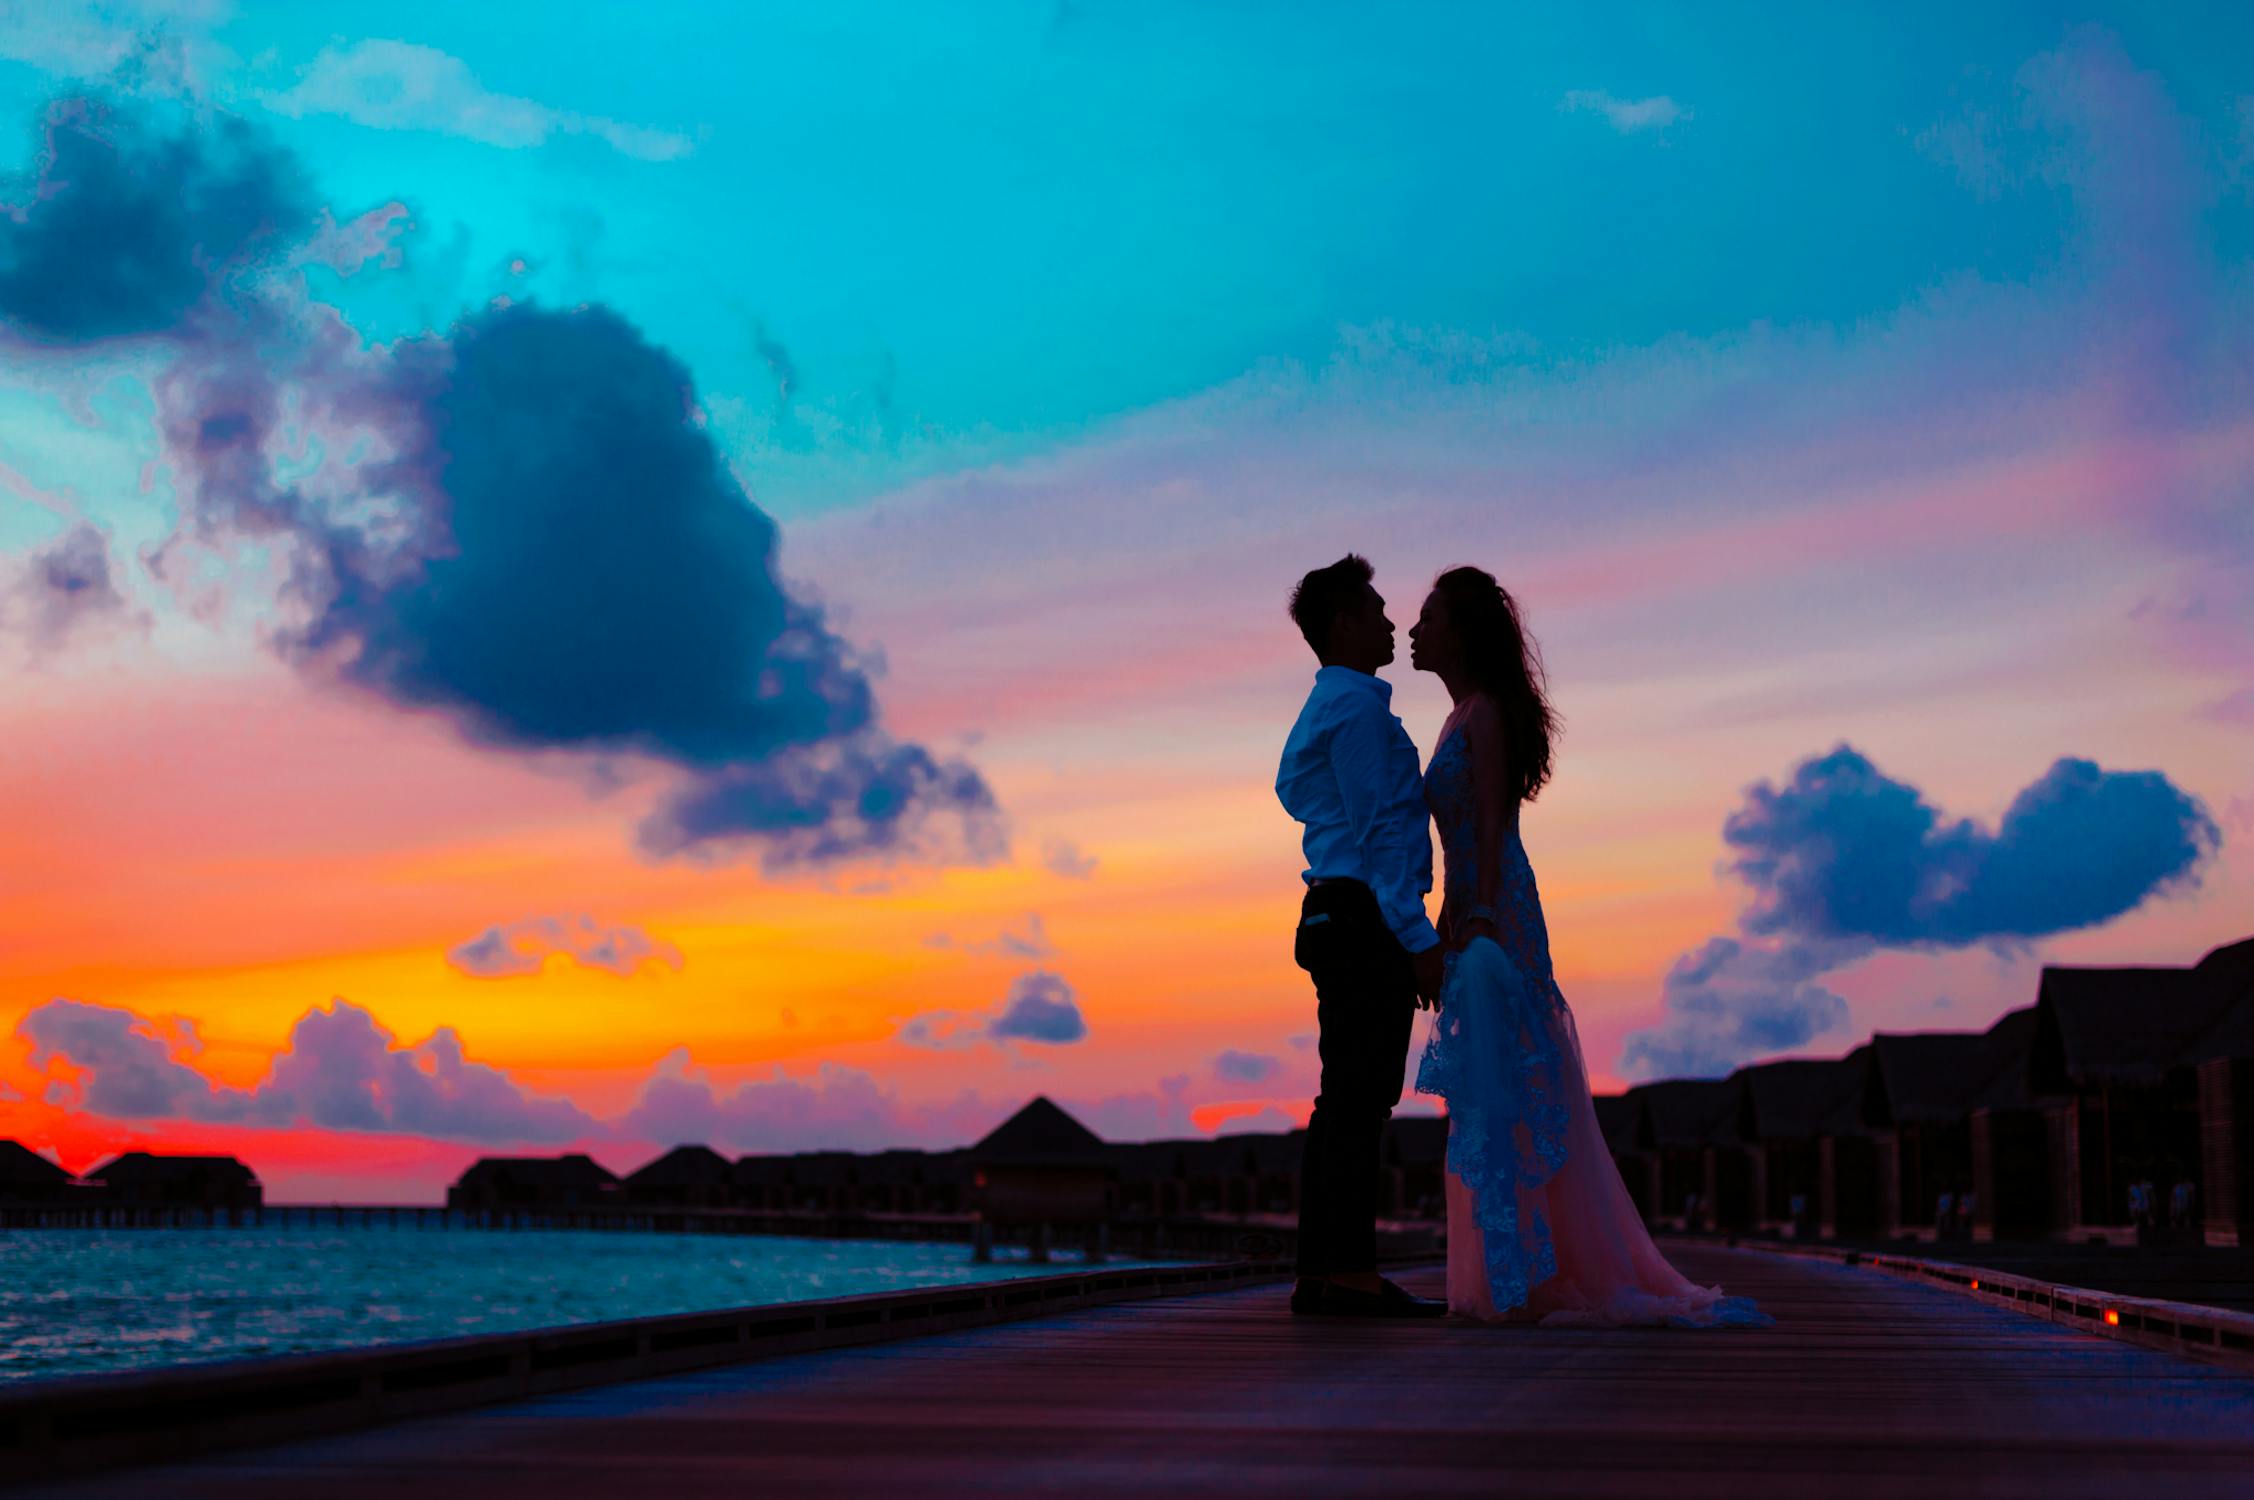 Indian Wedding Photo by Asad Photo Maldives from Pexels: https://www.pexels.com/photo/man-and-woman-wearing-wedding-attire-standing-on-sea-dock-during-golden-hour-1024965/